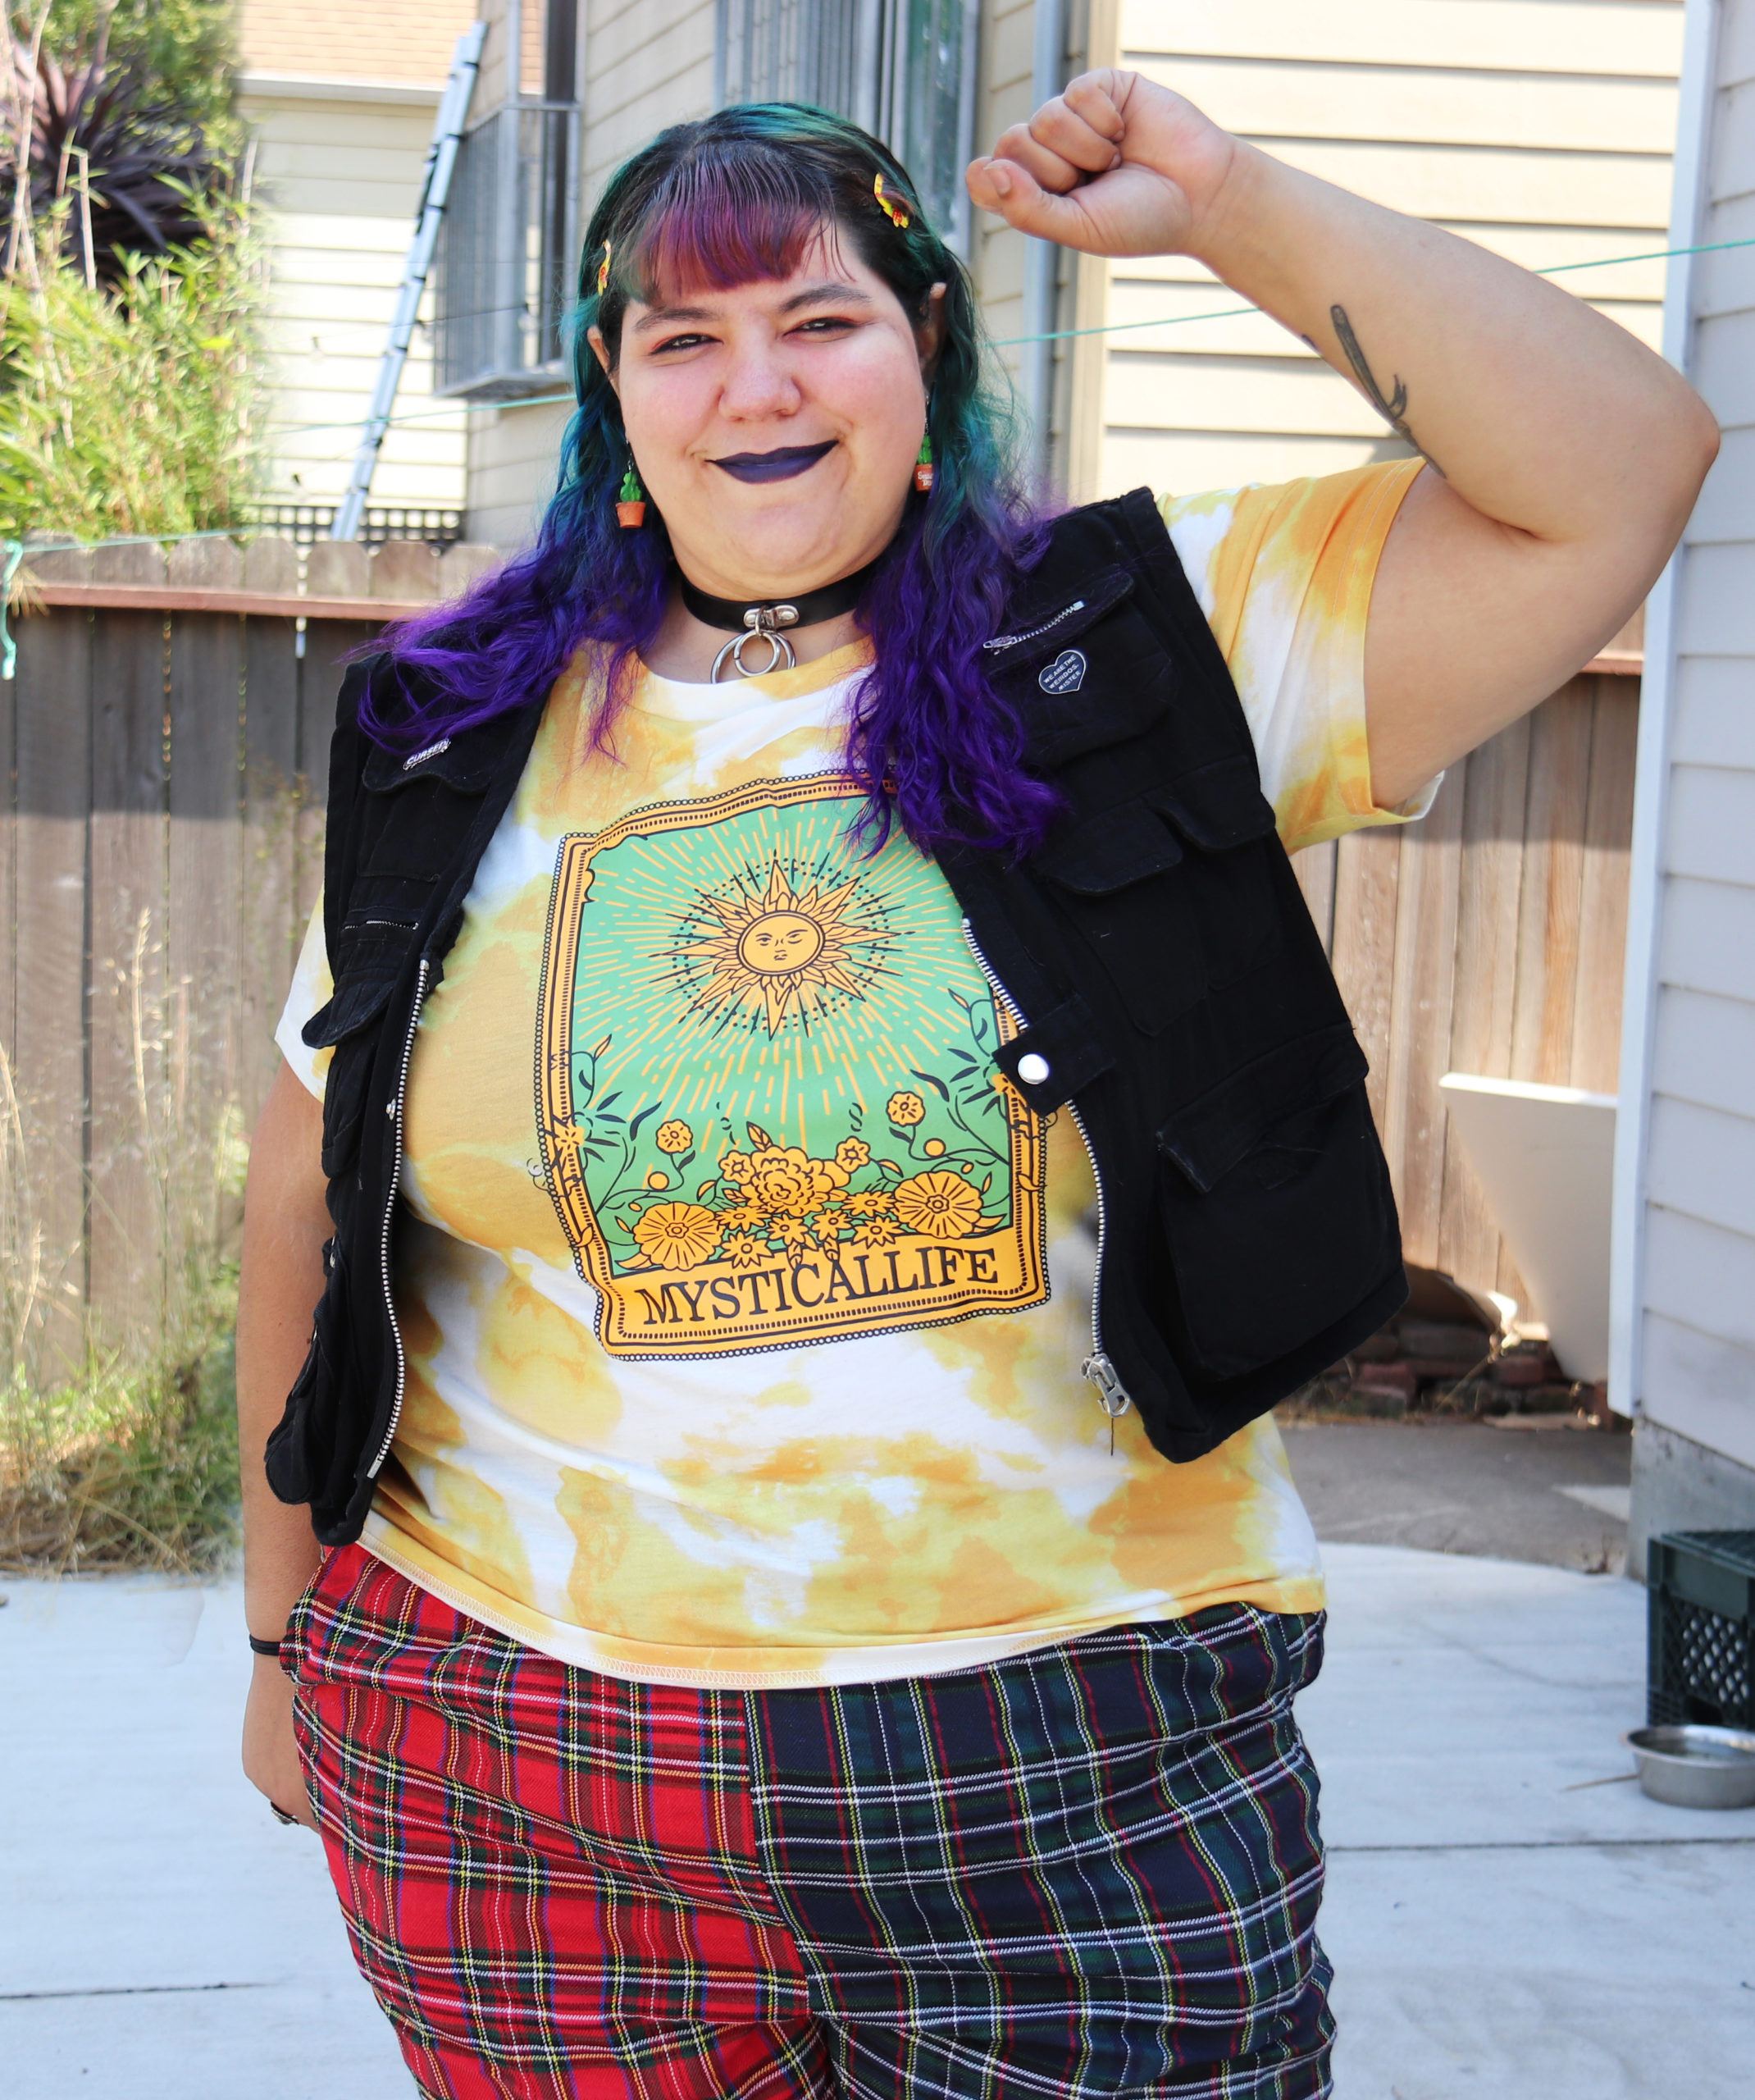 A woman with colorfully dyed hair raises her clenched fist and smiles at the camera. She is wear a graphic T-shirt, plaid pants, and a black vest.